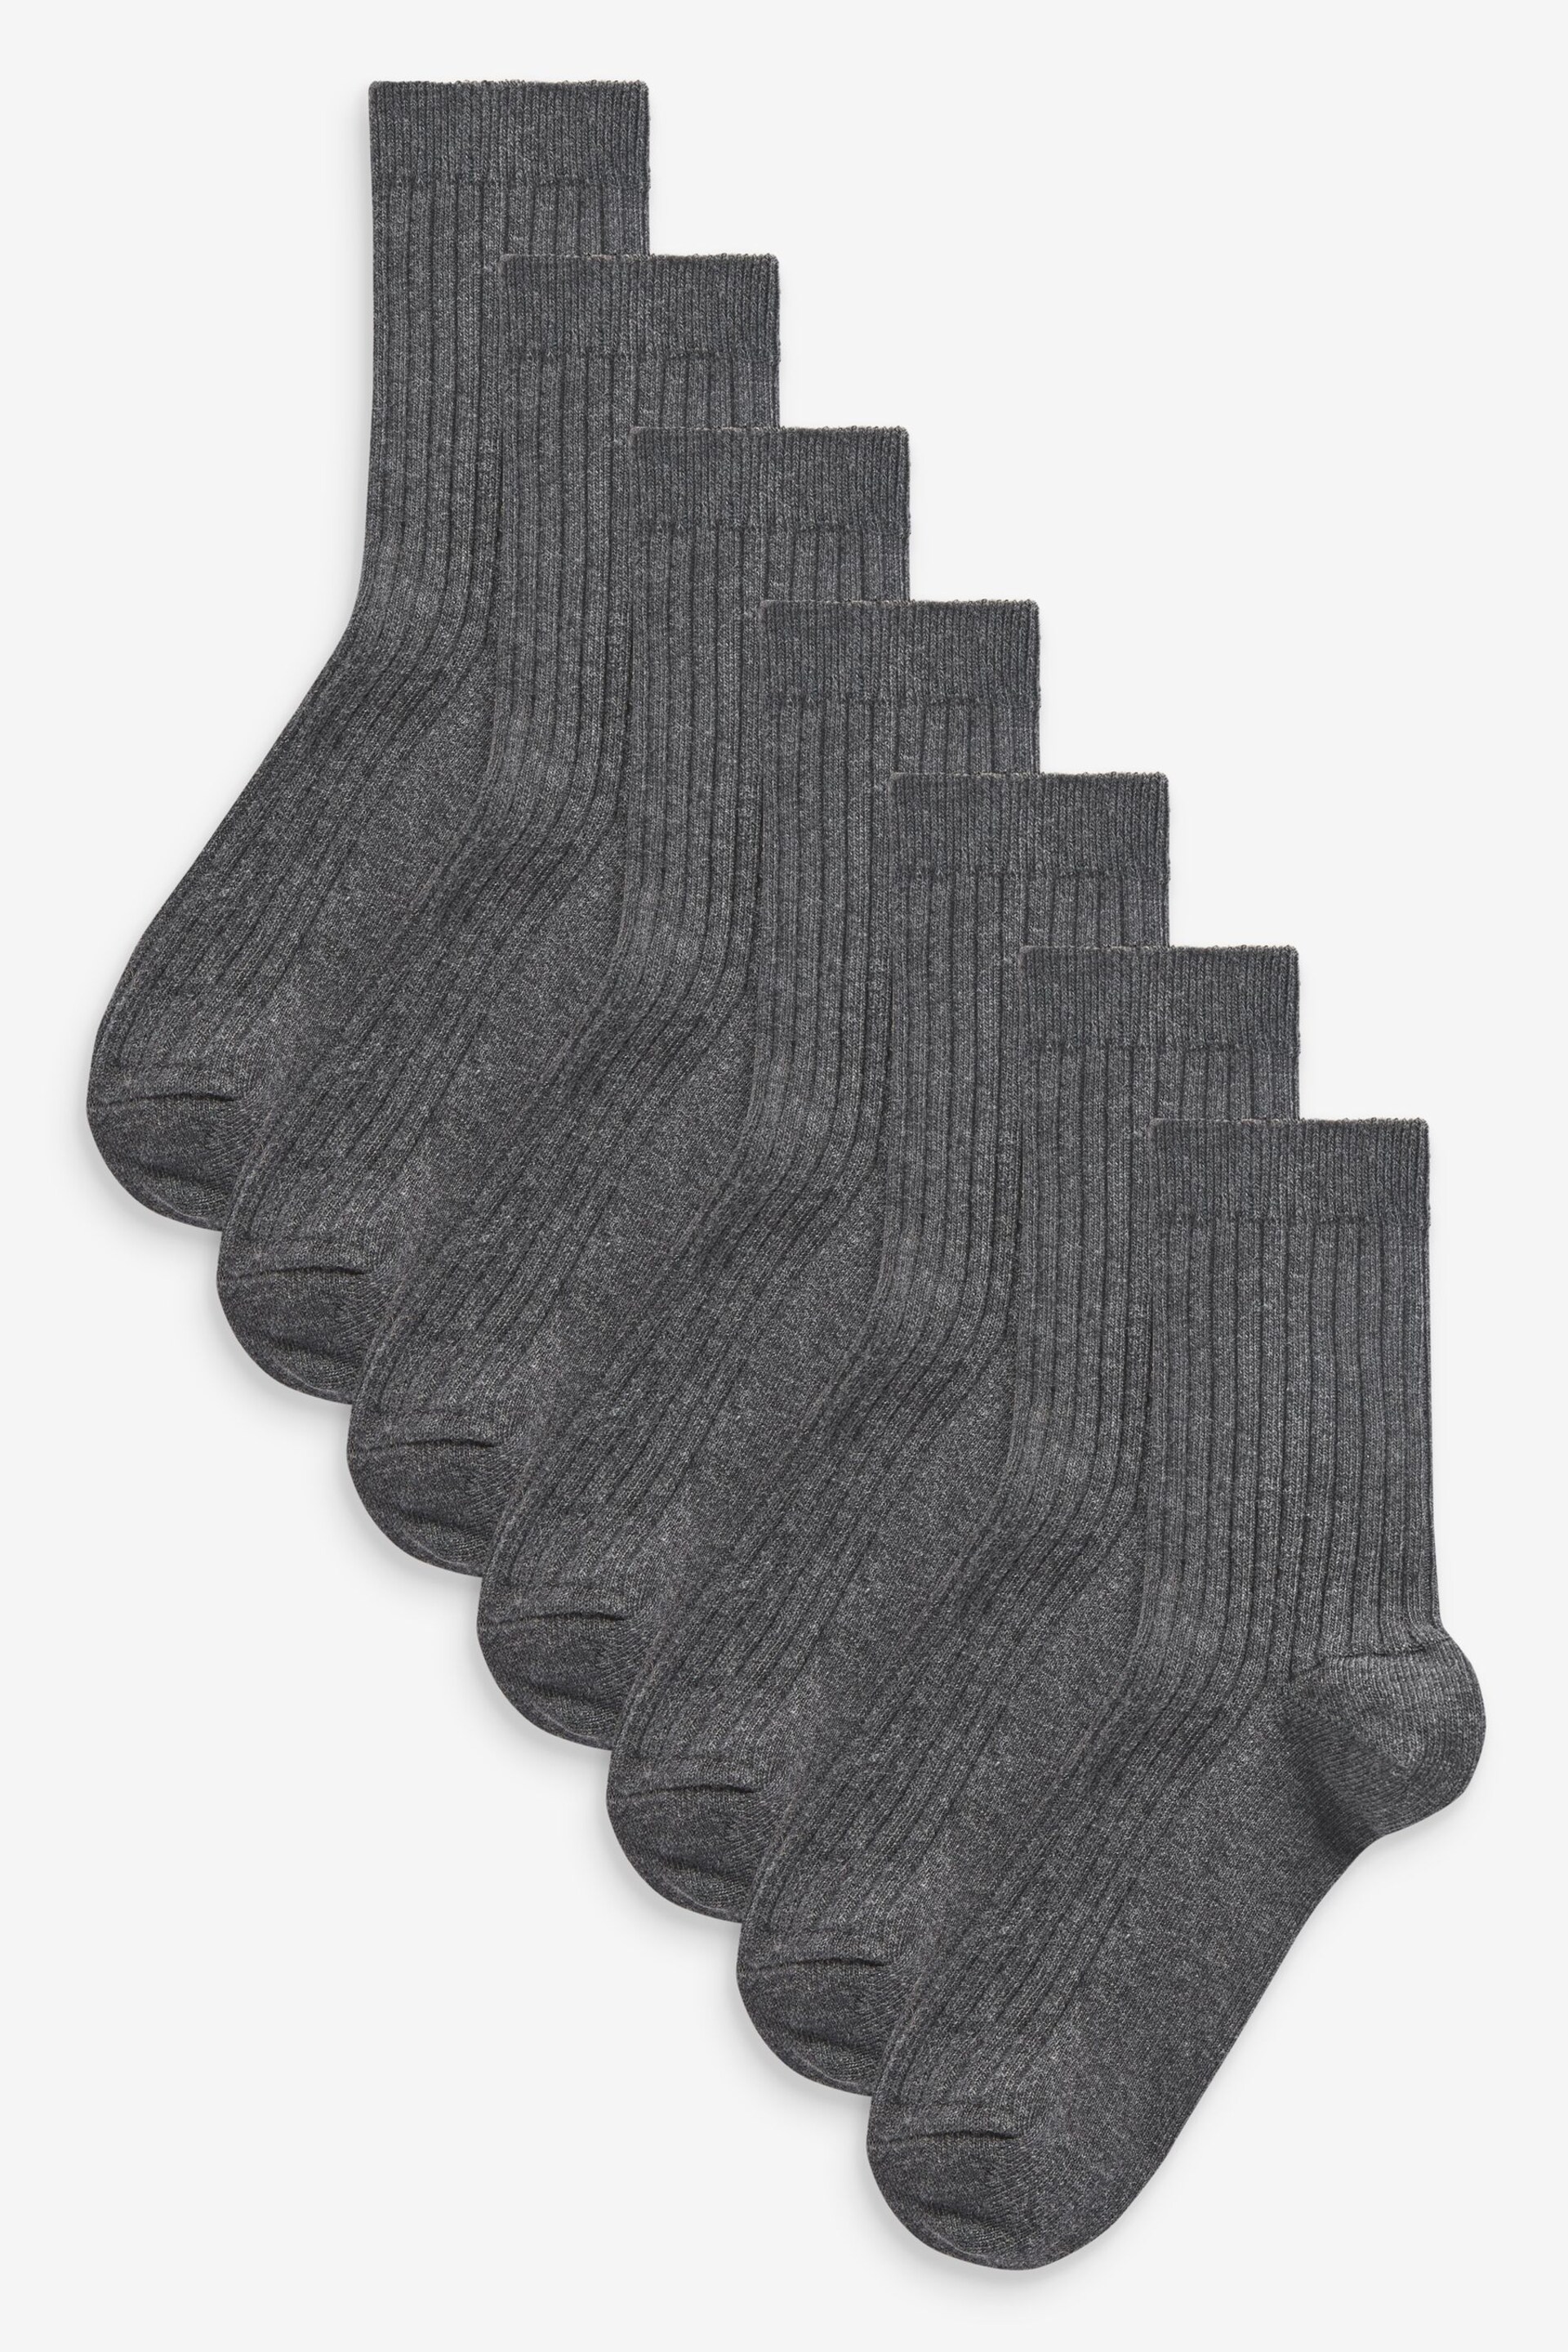 Grey Ribbed Cotton Rich Socks 7 Pack - Image 1 of 2